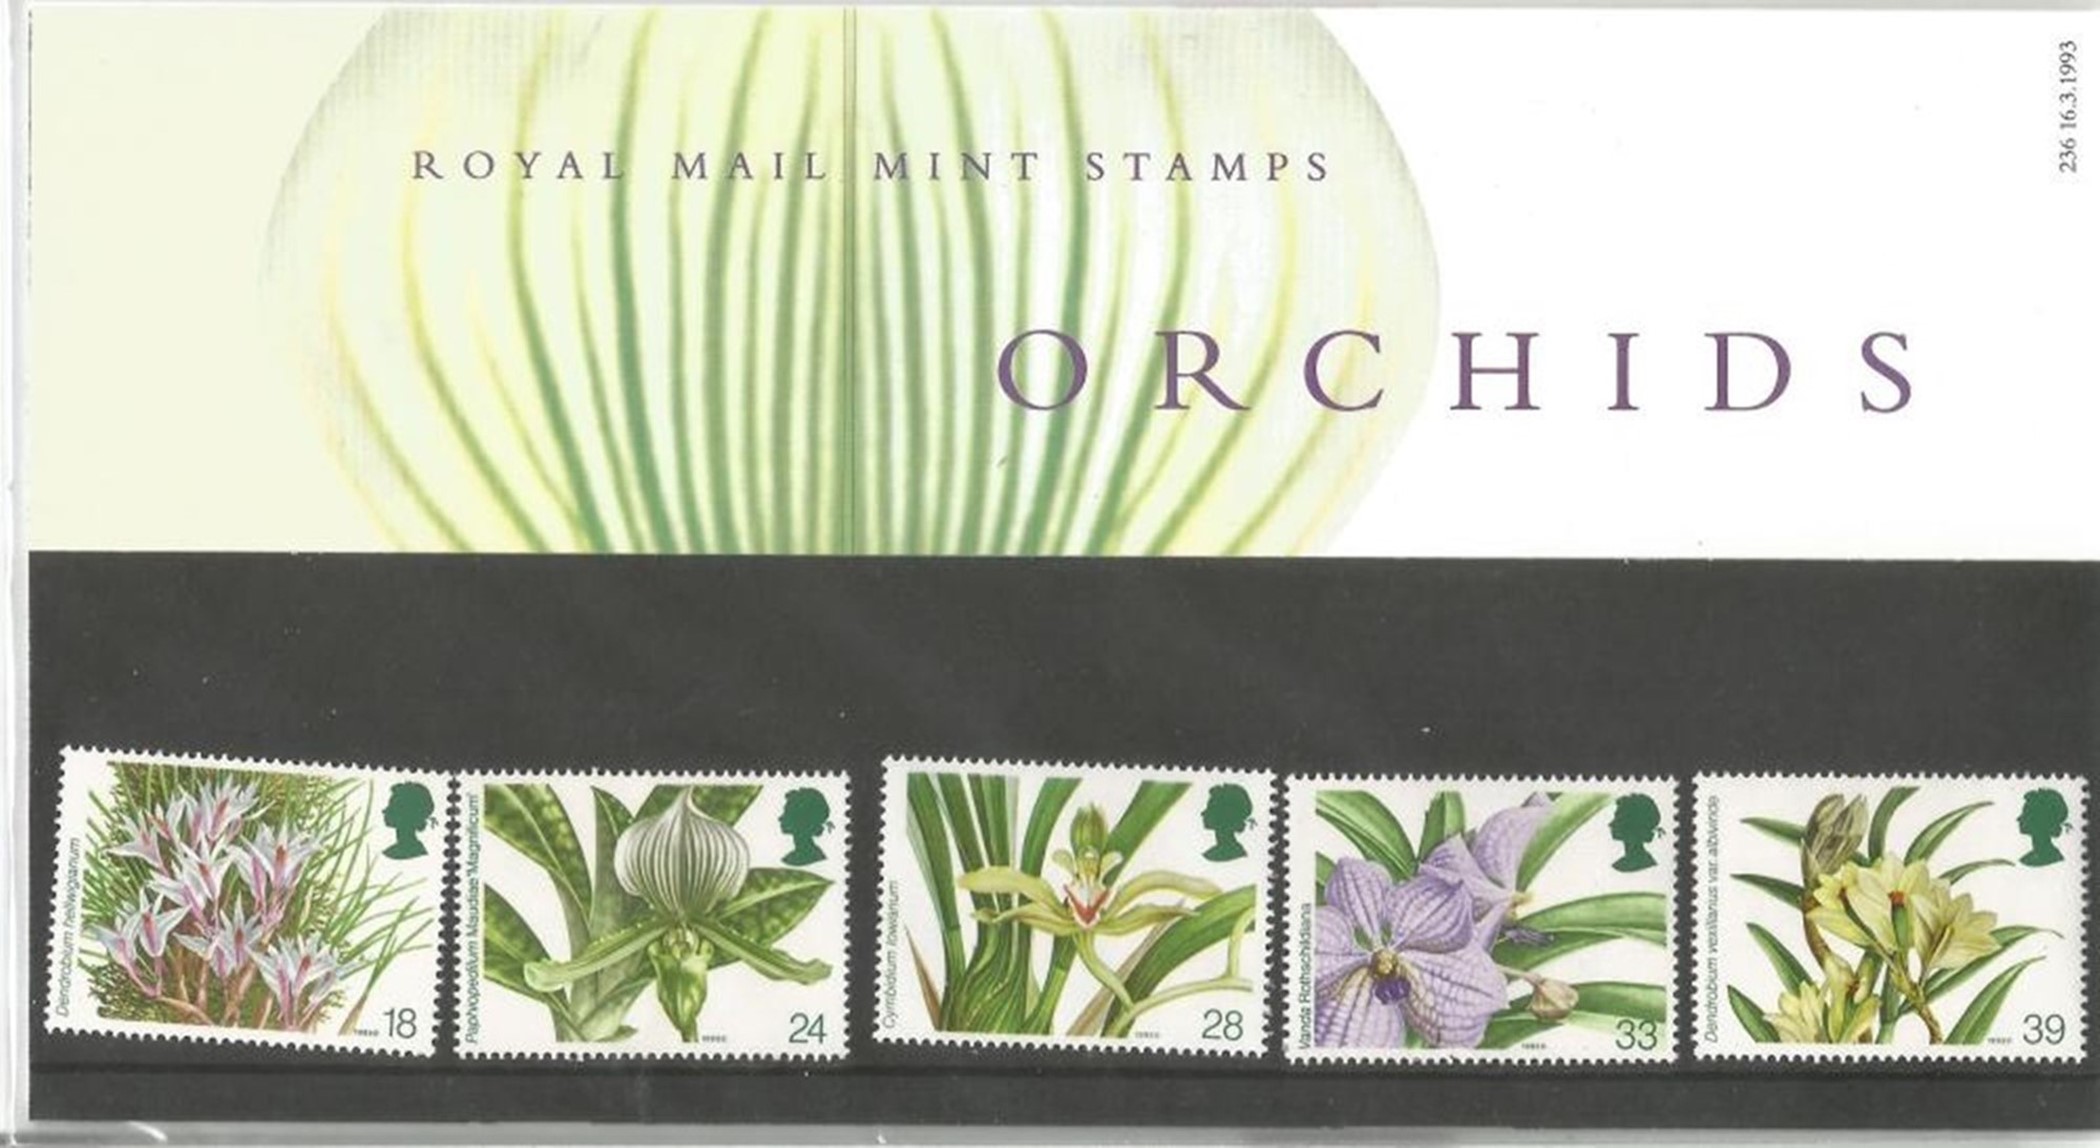 GB Mint Stamps Presentation Pack no 236 Orchids 1993. Good condition. We combine postage on multiple